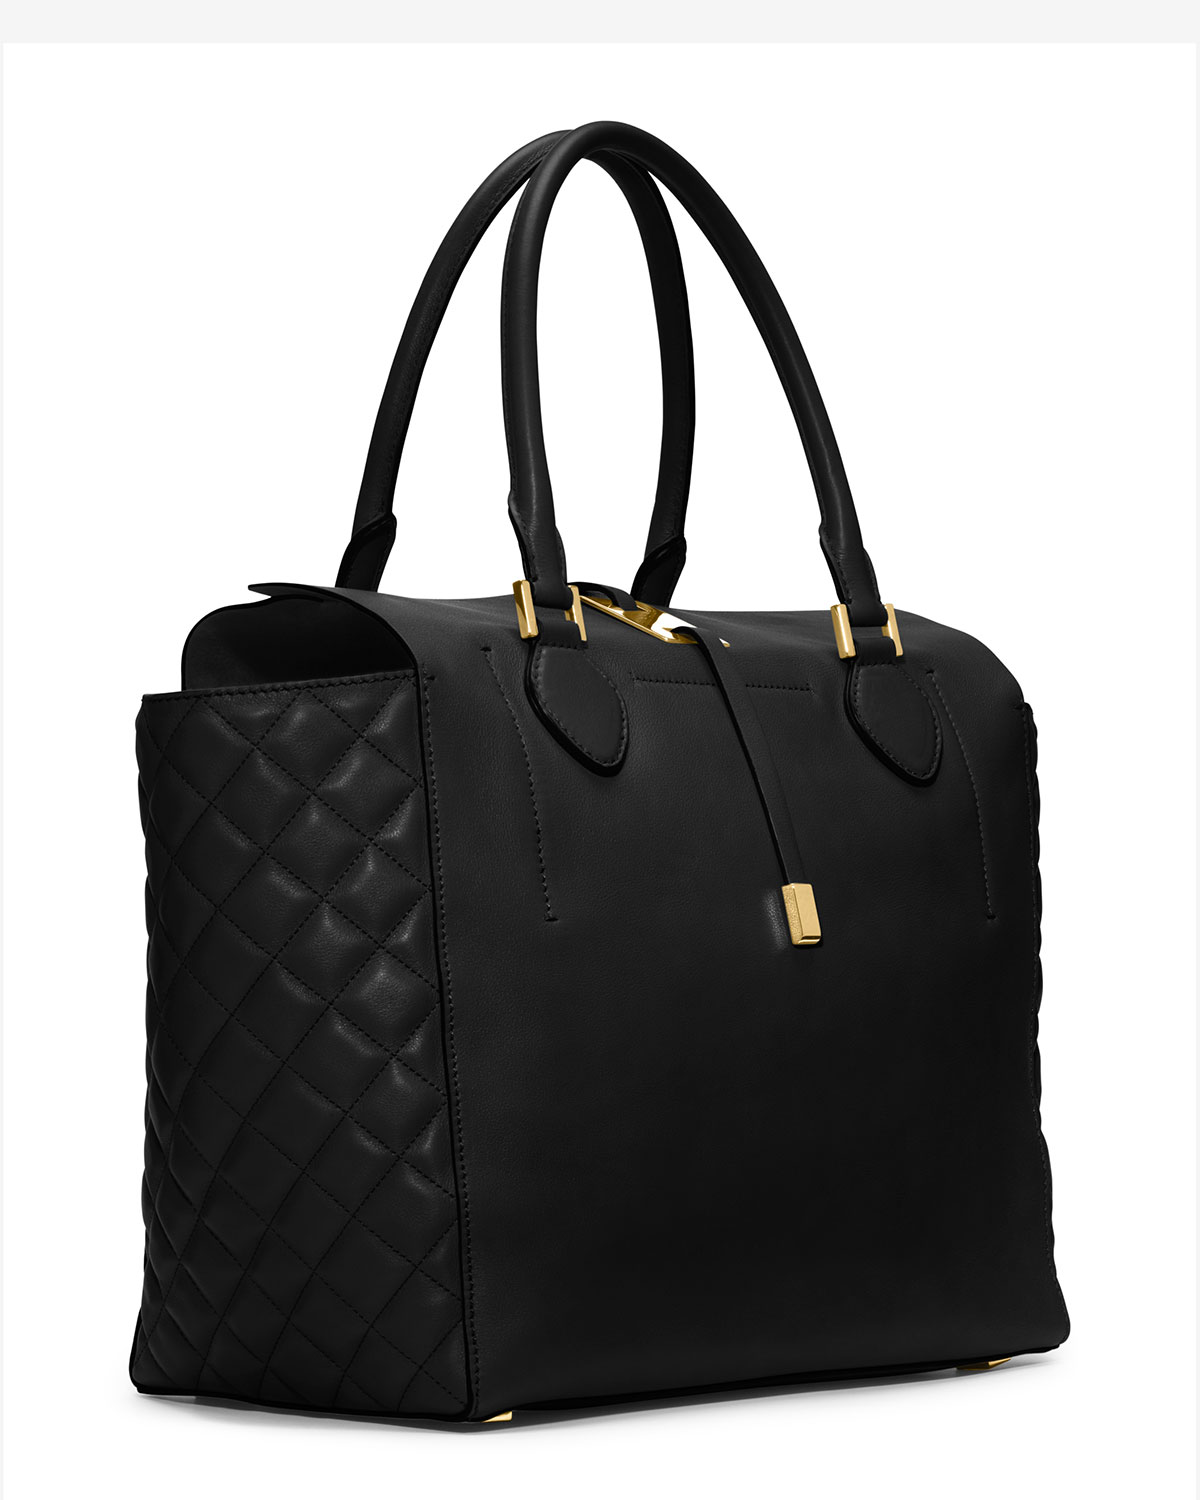 Michael Kors Large Miranda Quilted Tote in Black - Lyst